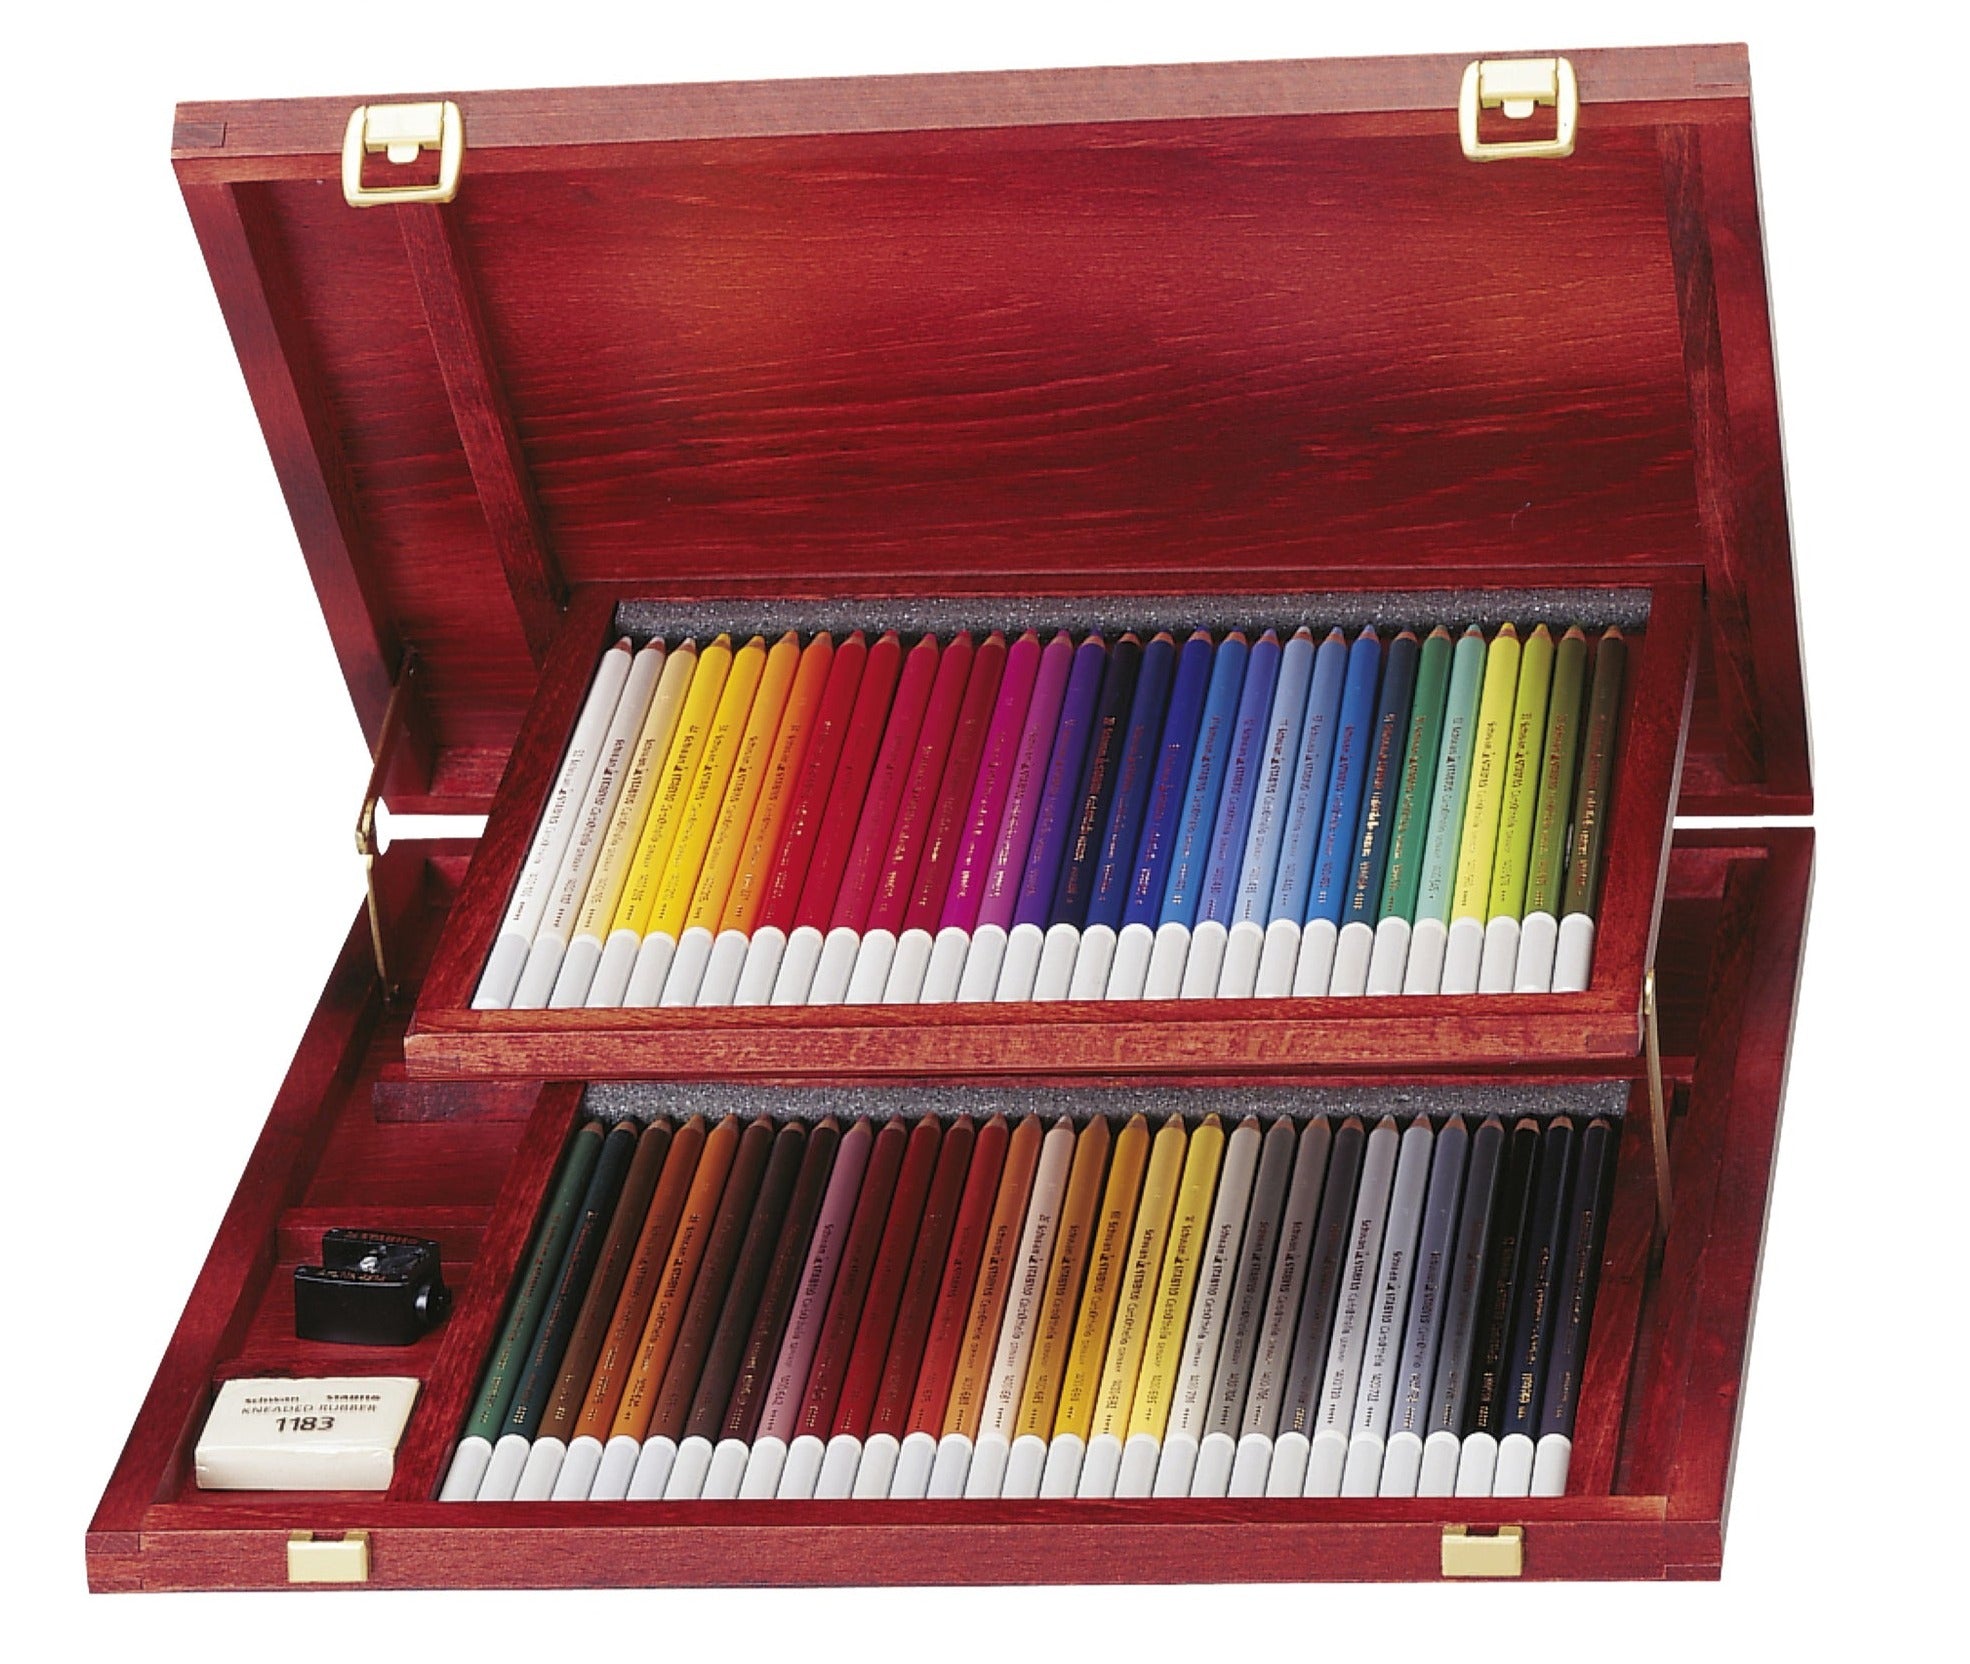 Stabilo CarbOthello Chalk-Pastel Colored Pencil, 4.4 mm - 60-Color Wooden Case Set - Schwan-STABILO -Most colourful Stationery Shop